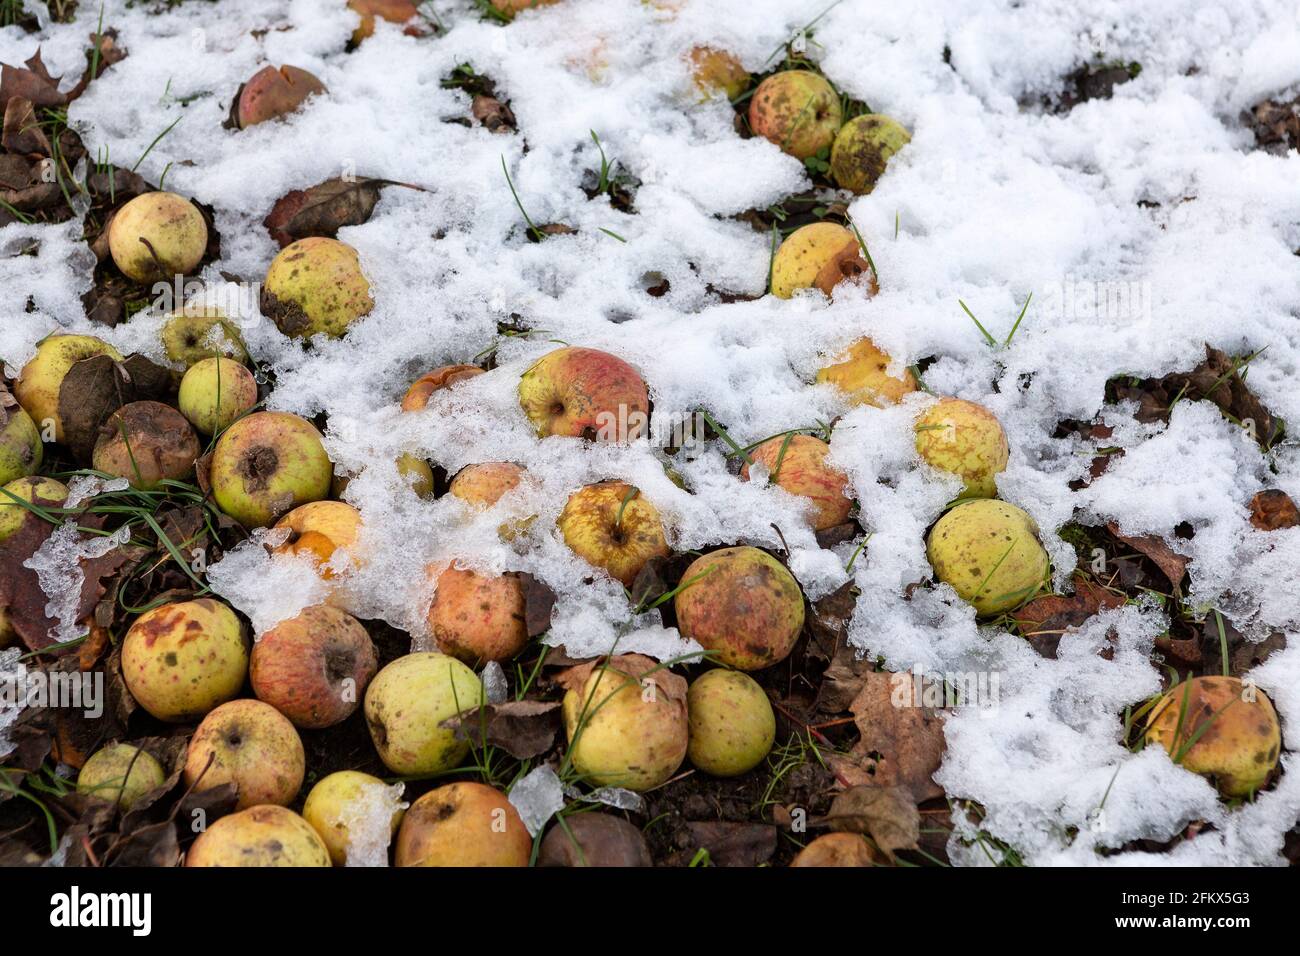 Apples, Windfalls In Snow Stock Photo